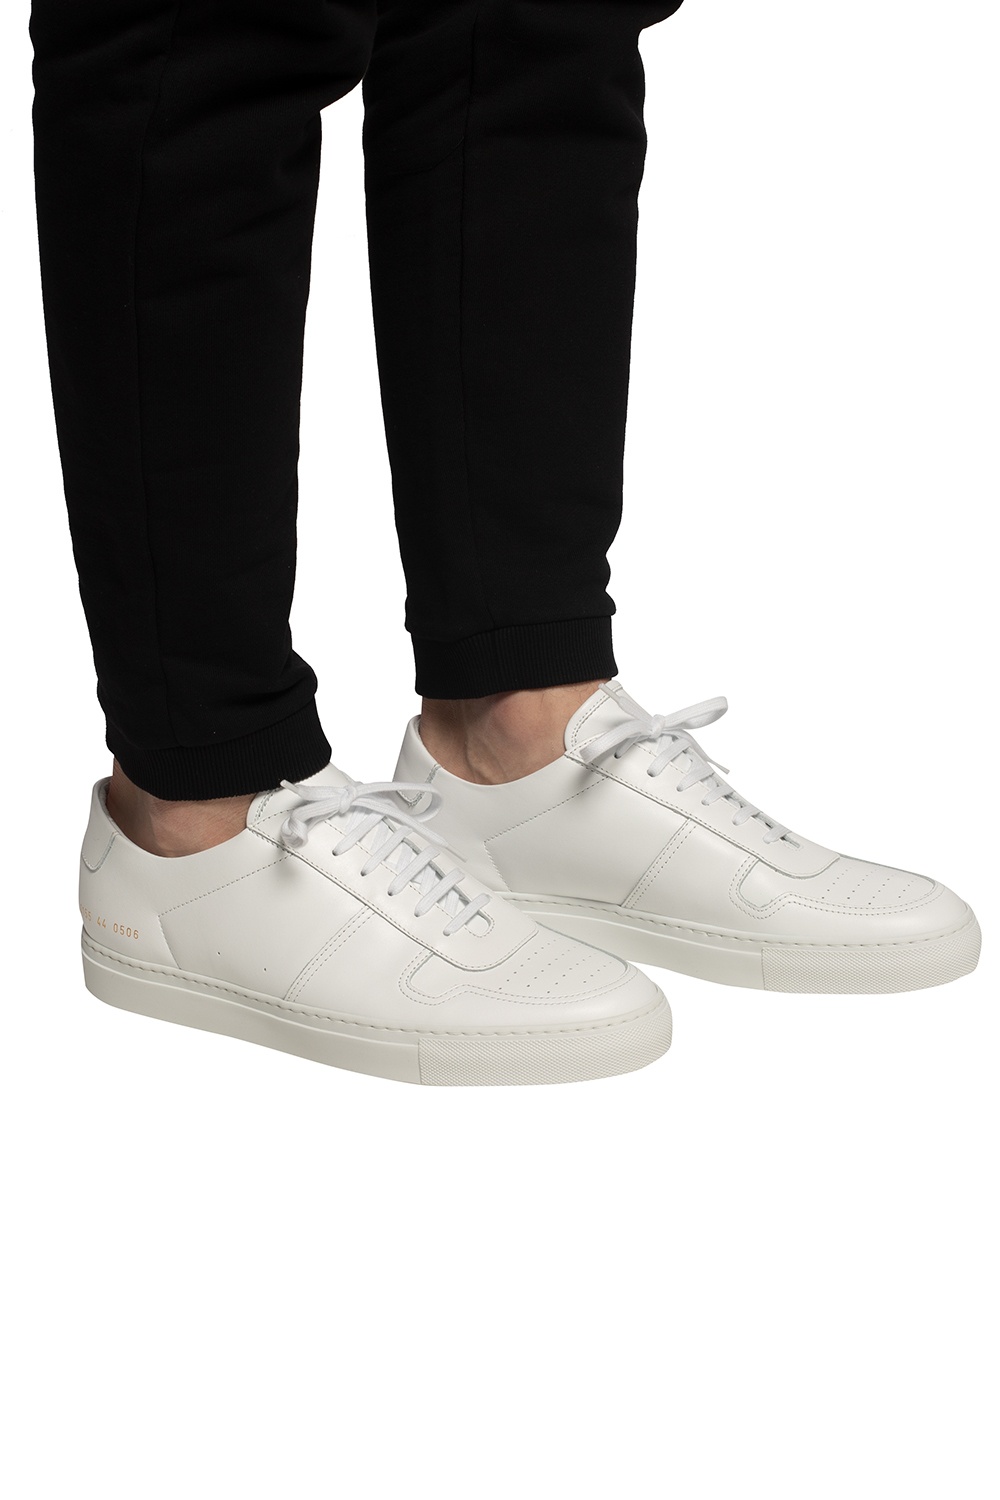 Common Projects ‘Bball’ sneakers | Men's Shoes | Vitkac